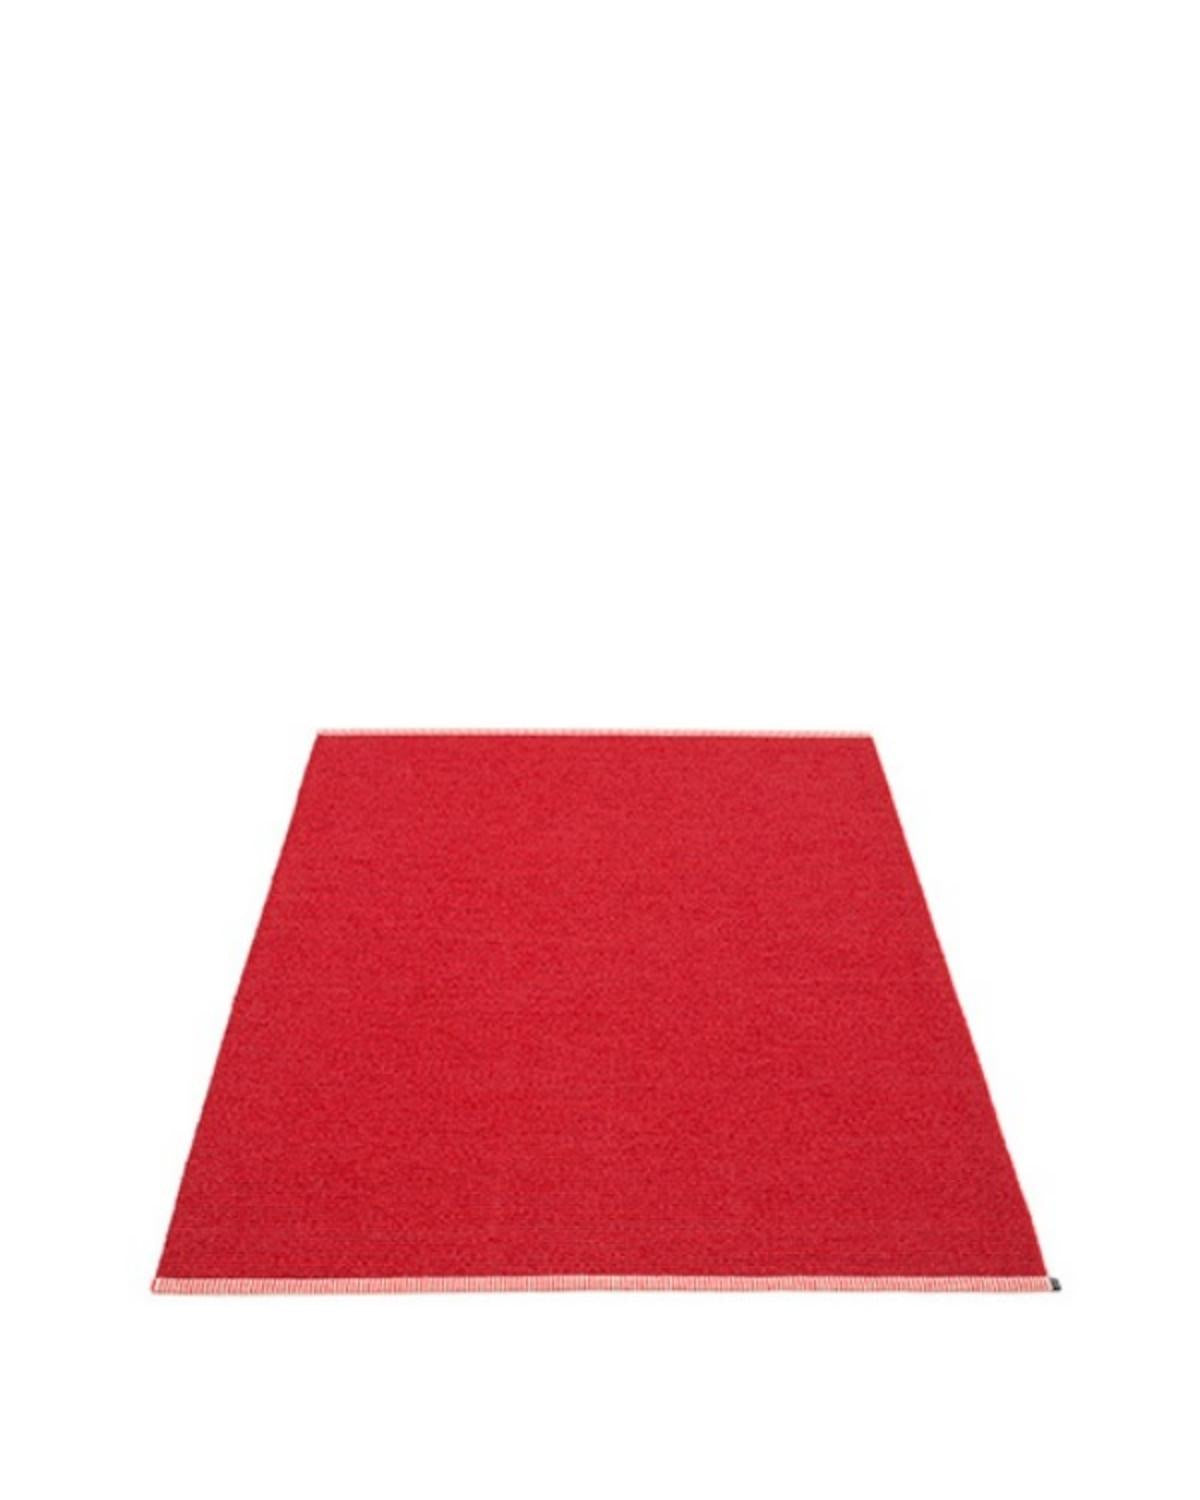 Pappelina Rug MONO Red 4.5 x 6.5 ft  image 1